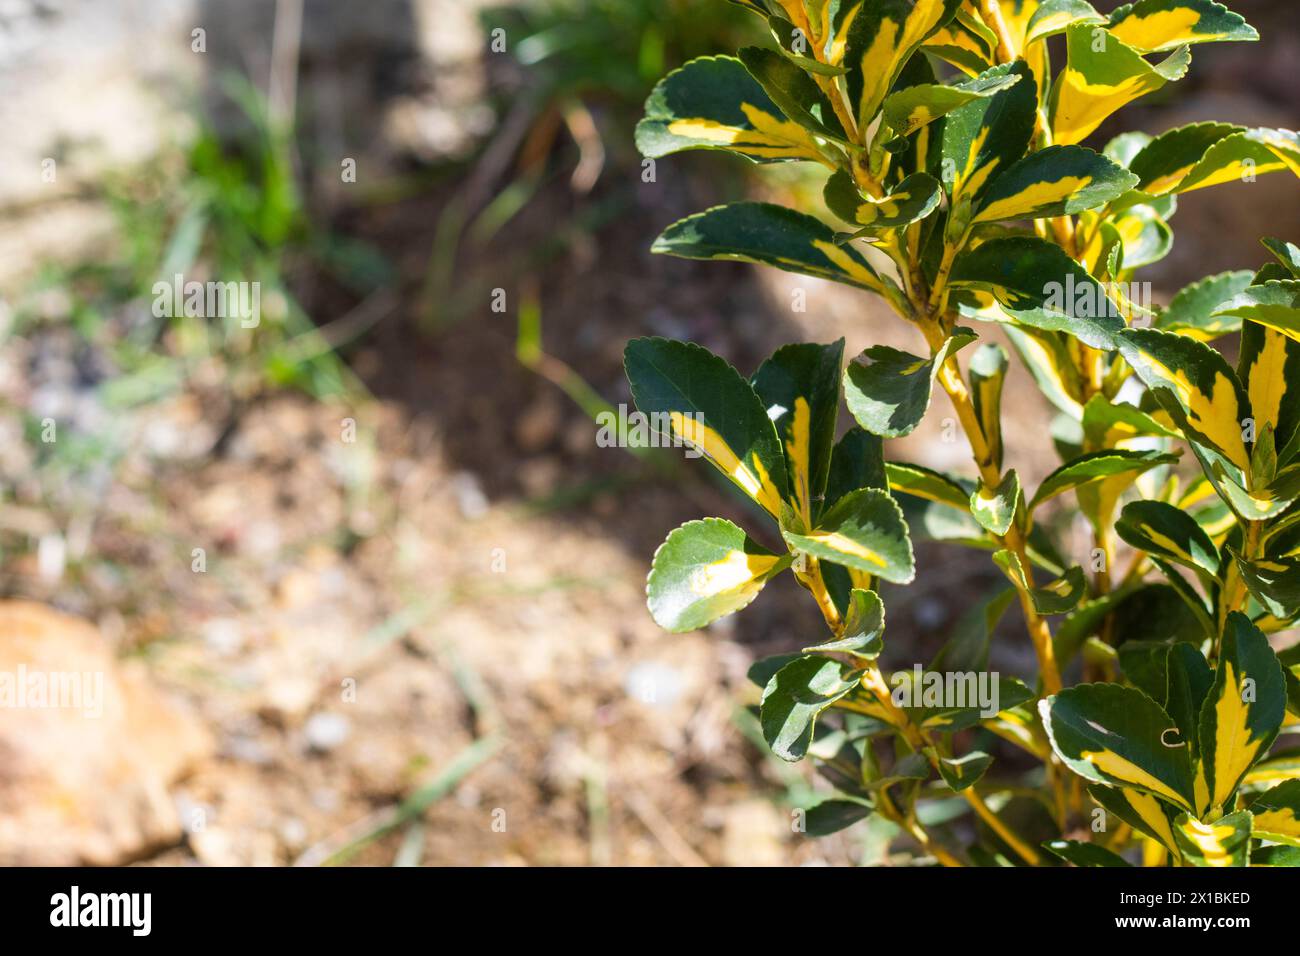 Euonymus japonicus in the garden Stock Photo